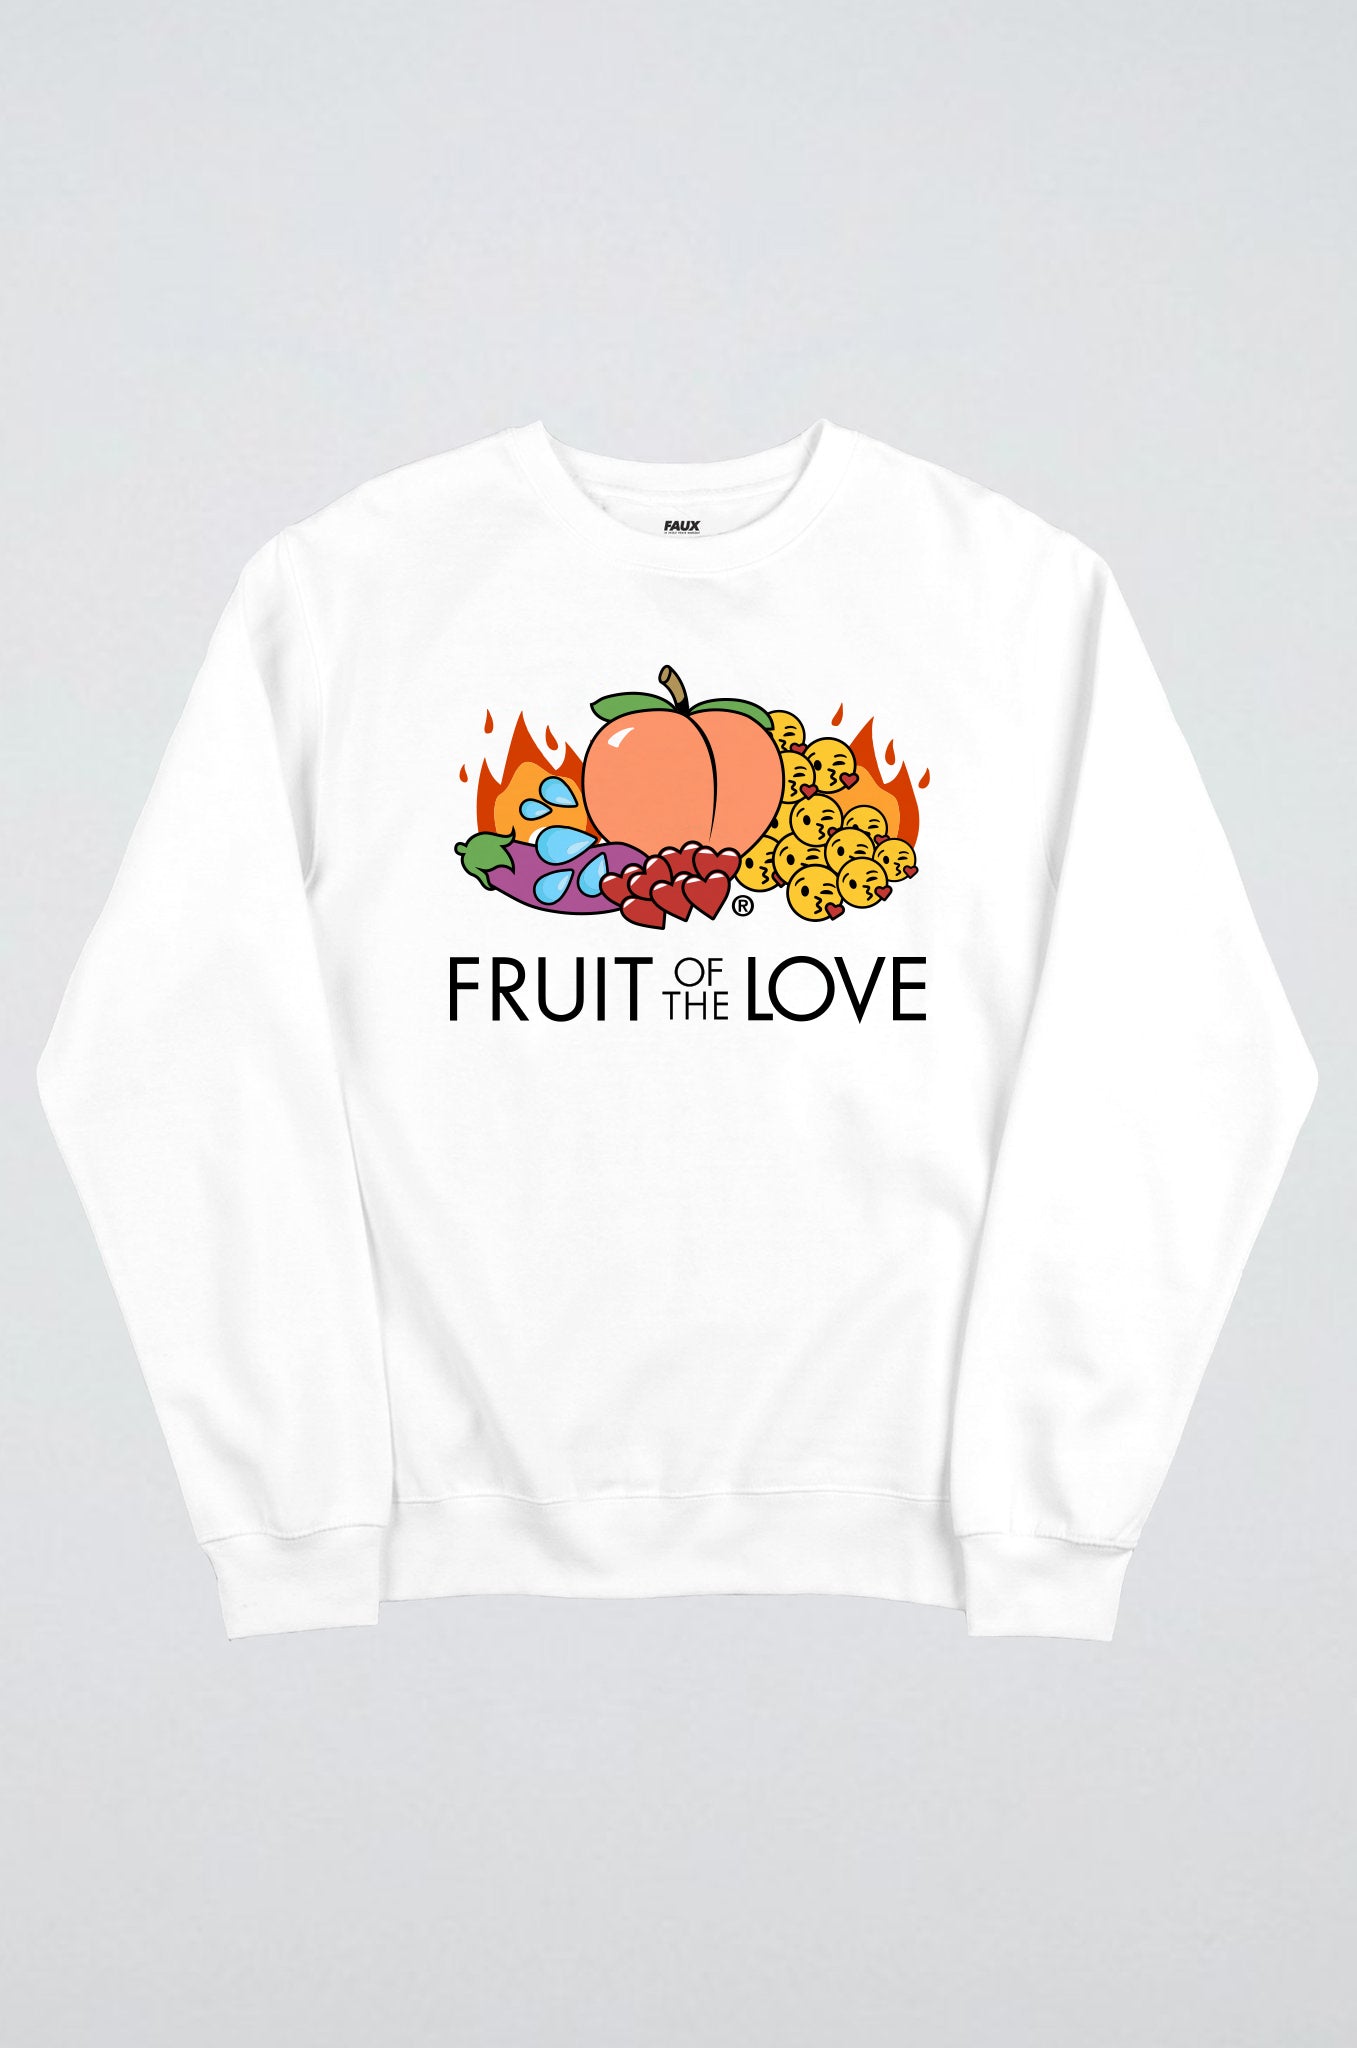 Fruit of the love